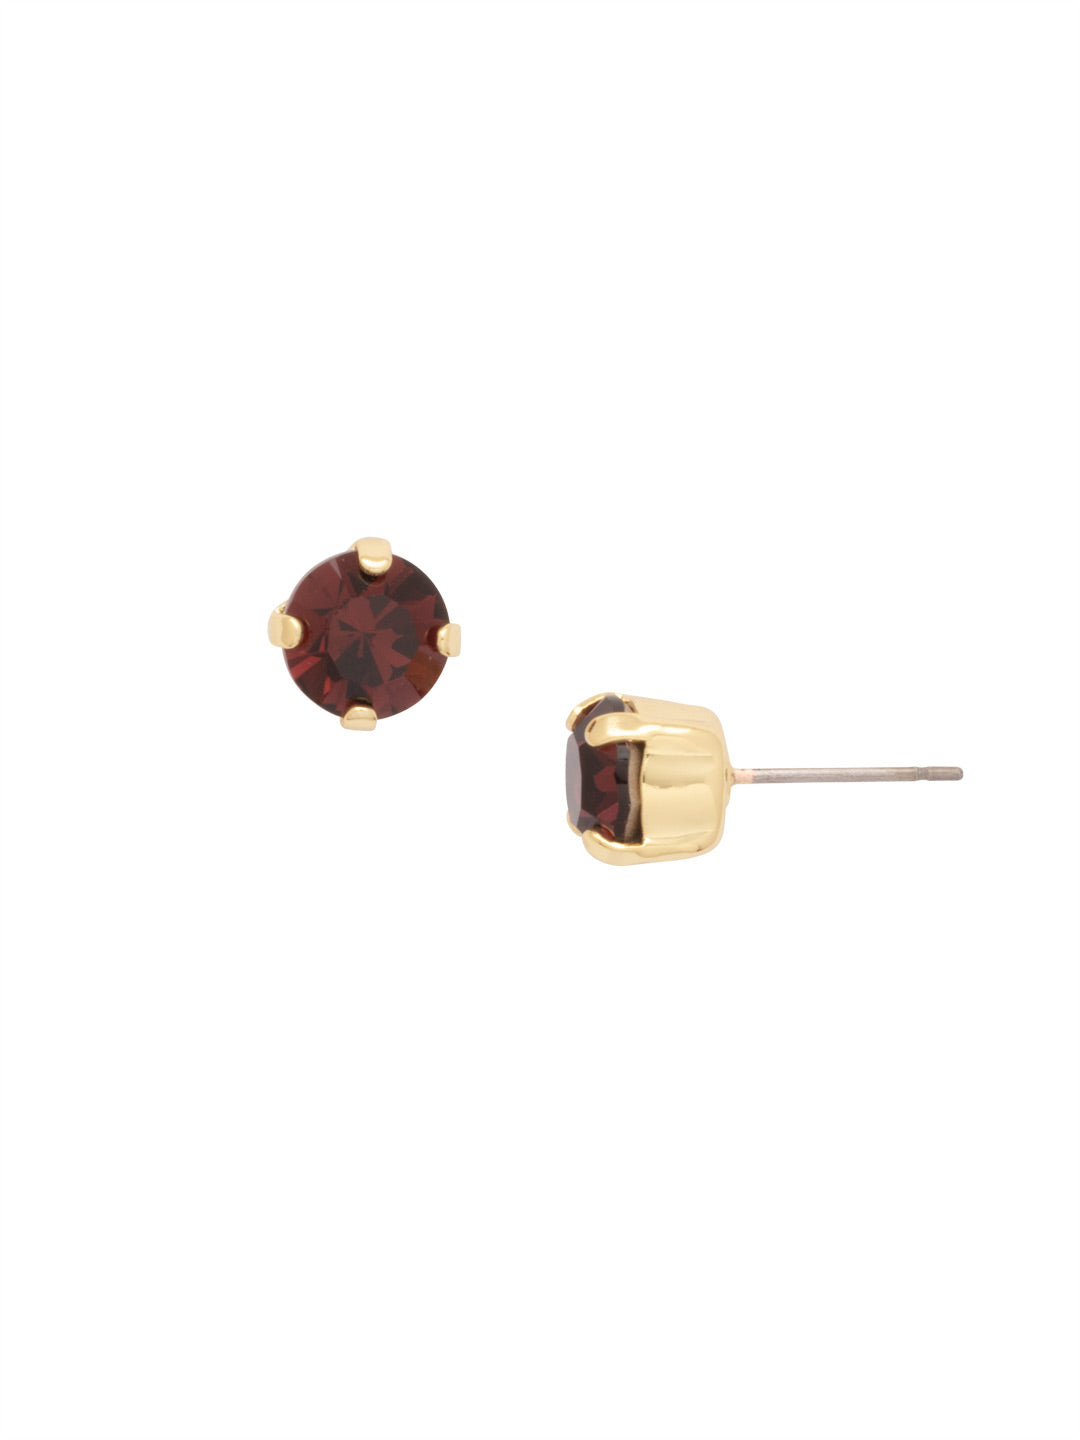 Simple Stud Earrings - EFC99BGMRL - <p>The Simple Stud Earrings feature a single solid crystal on a surgical steel post, creating a small but sparkly everyday staple! Need help picking a stud? <a href="https://www.sorrelli.com/blogs/sisterhood/round-stud-earrings-101-a-rundown-of-sizes-styles-and-sparkle">Check out our size guide!</a> From Sorrelli's Merlot collection in our Bright Gold-tone finish.</p>